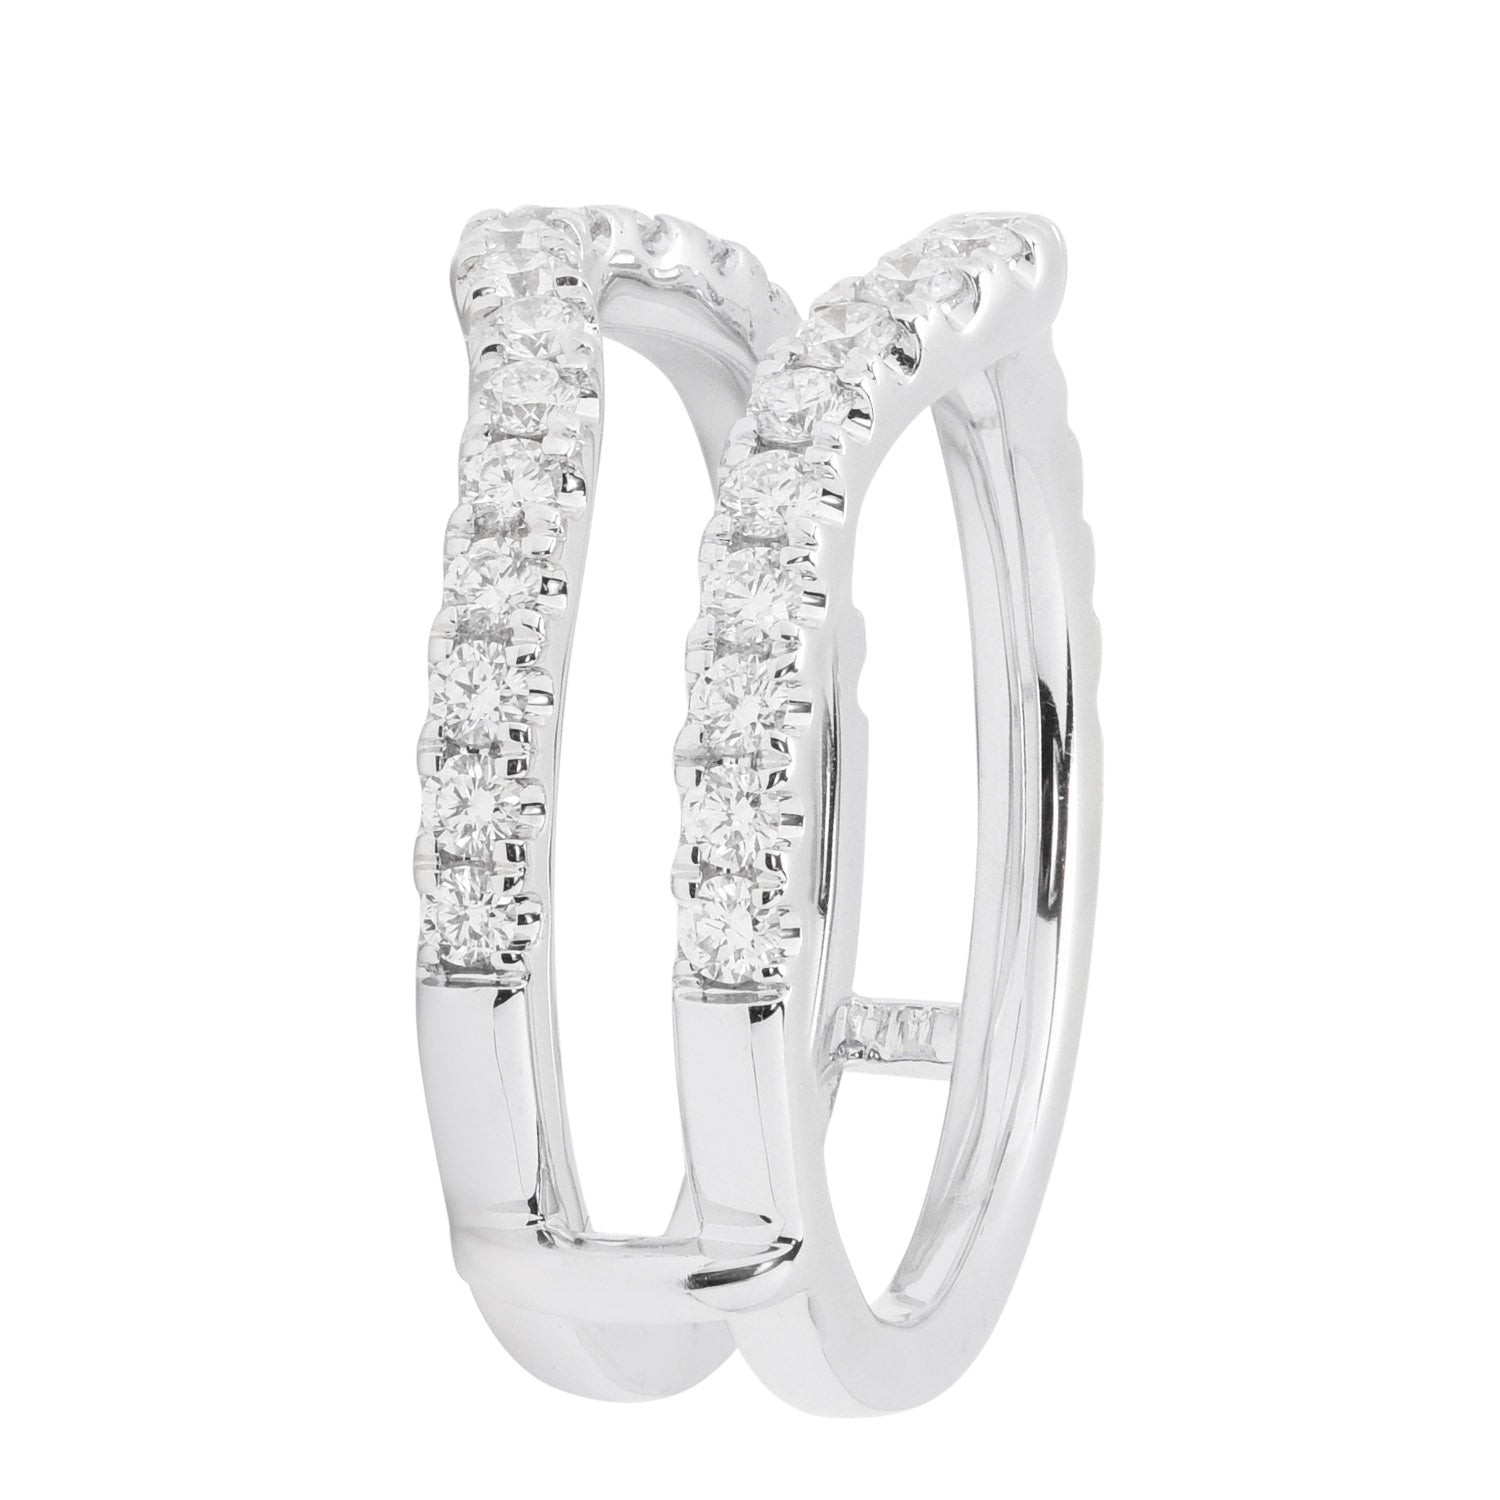 Diamond Wedding Ring Curved Insert in 14kt White Gold (3/4ct tw)